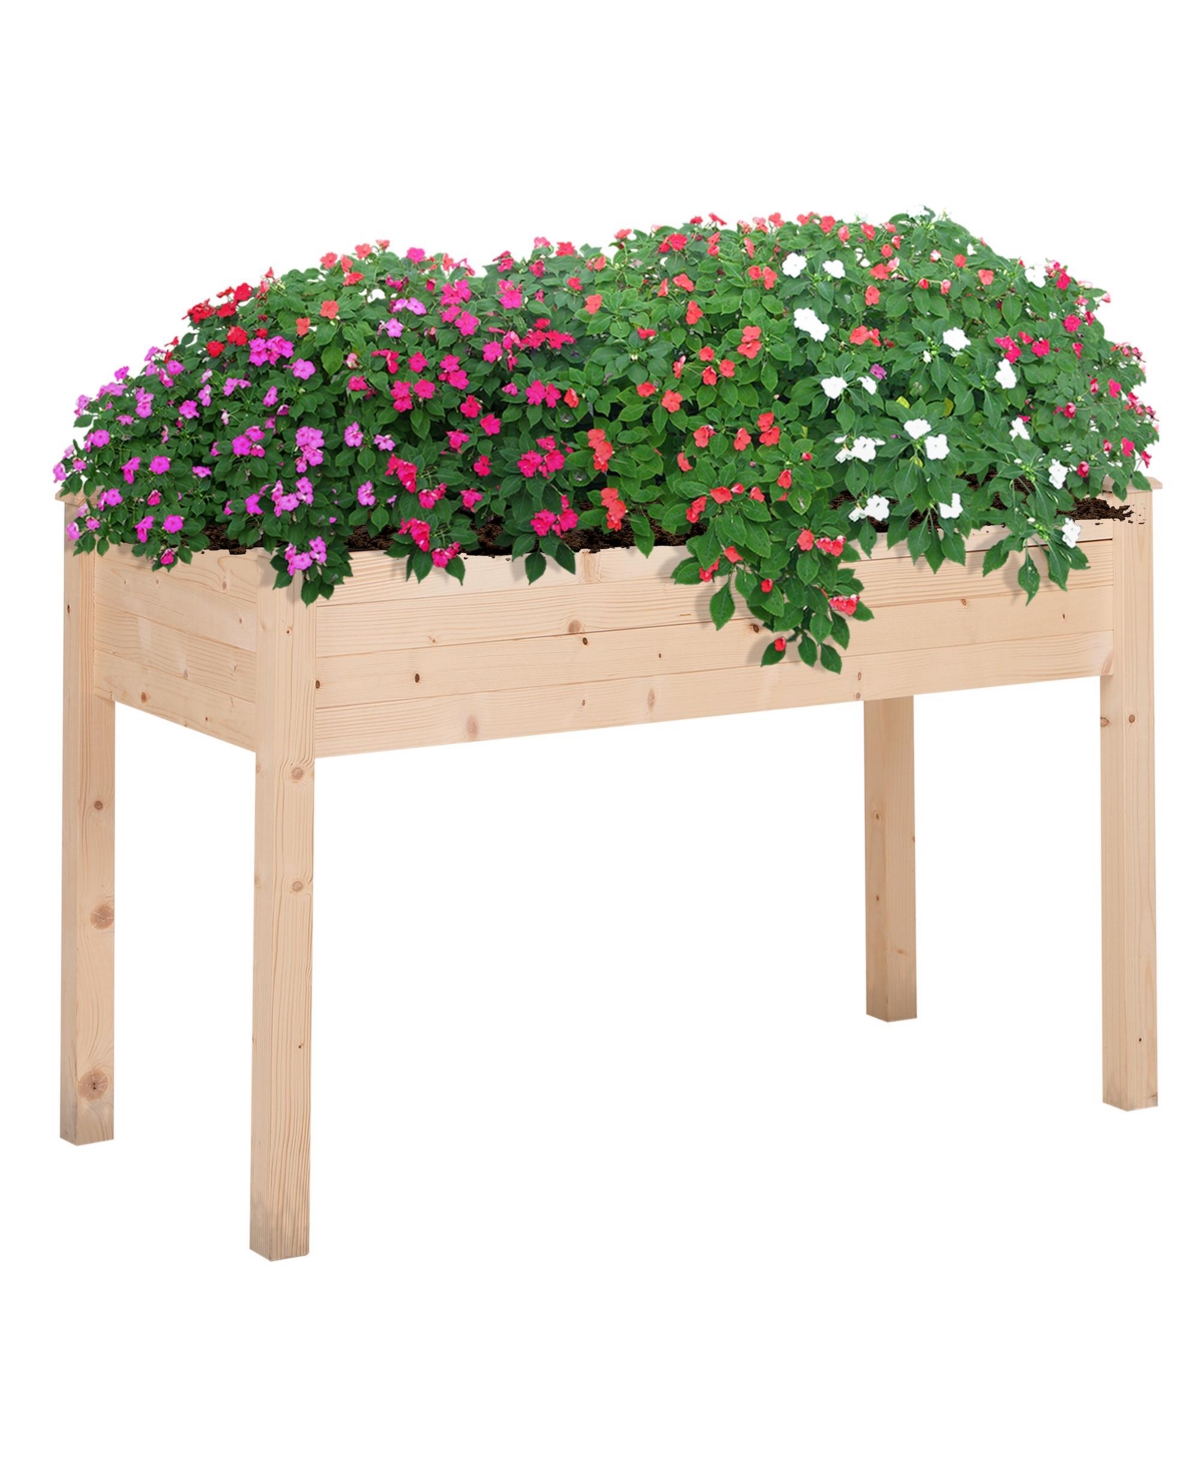 Elevated Plant Workstation & Bed w/ Country Style & Inner Erosion Bag - Natural